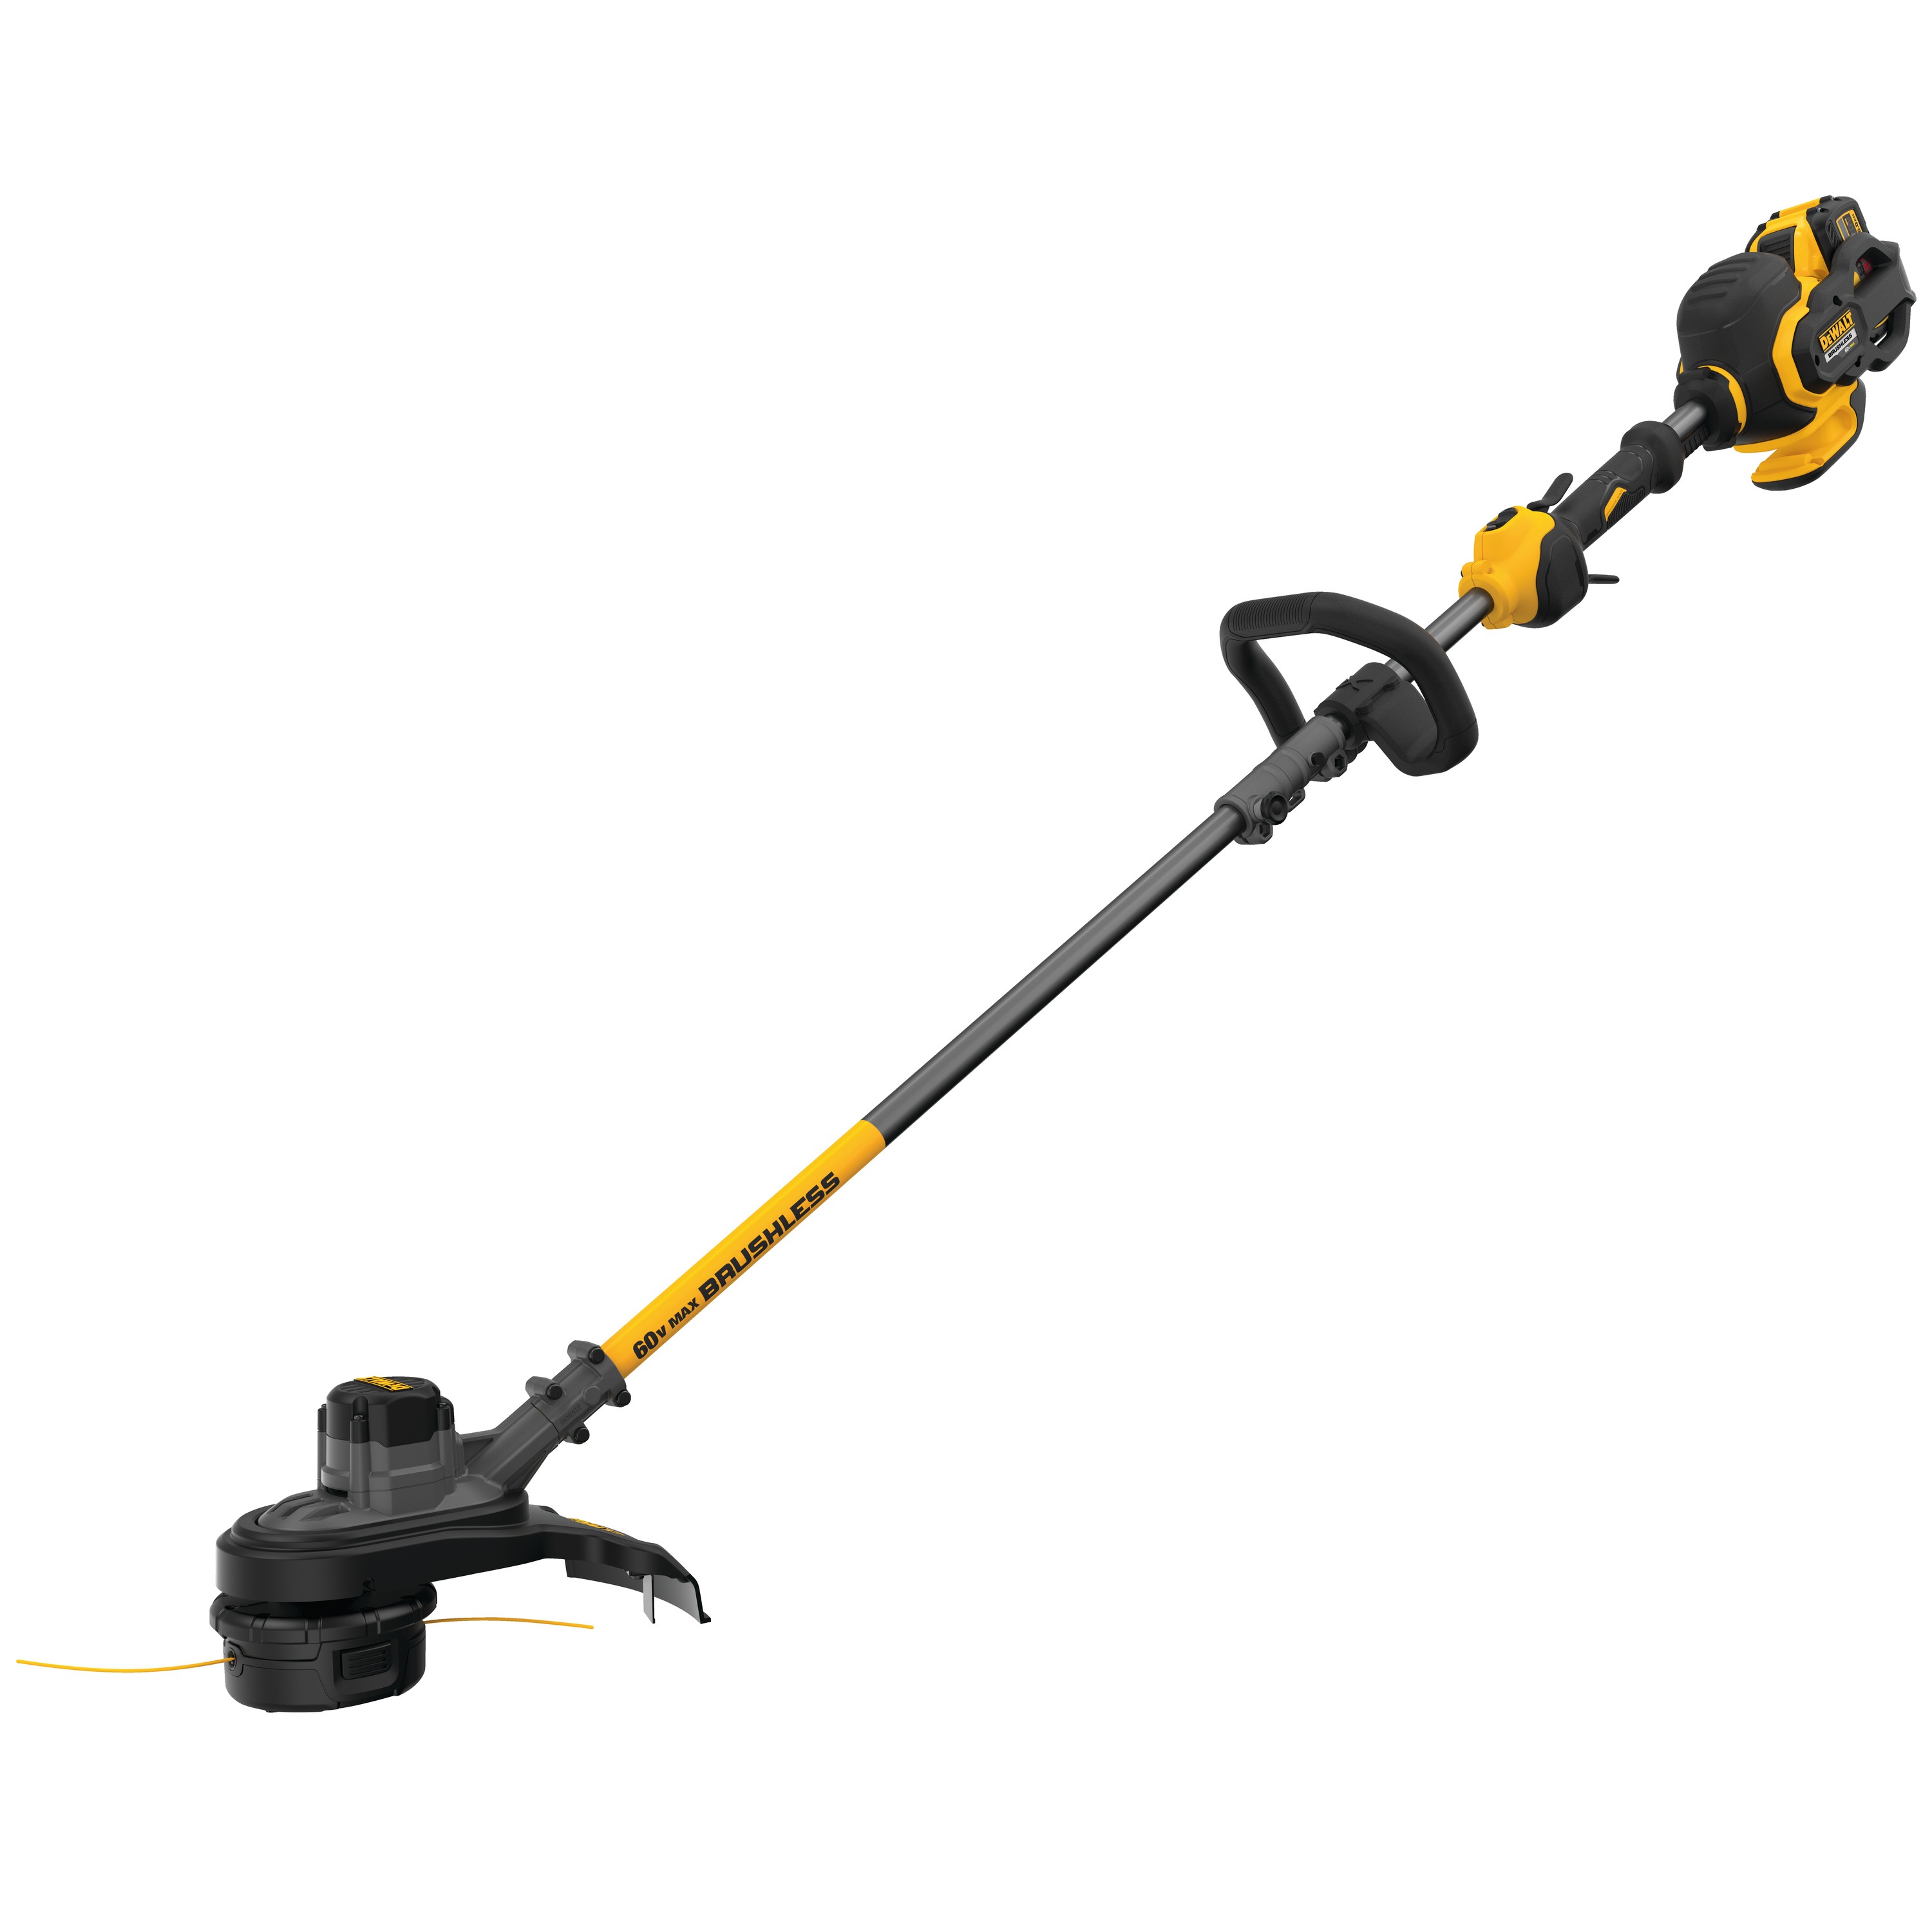 rechargeable line trimmer